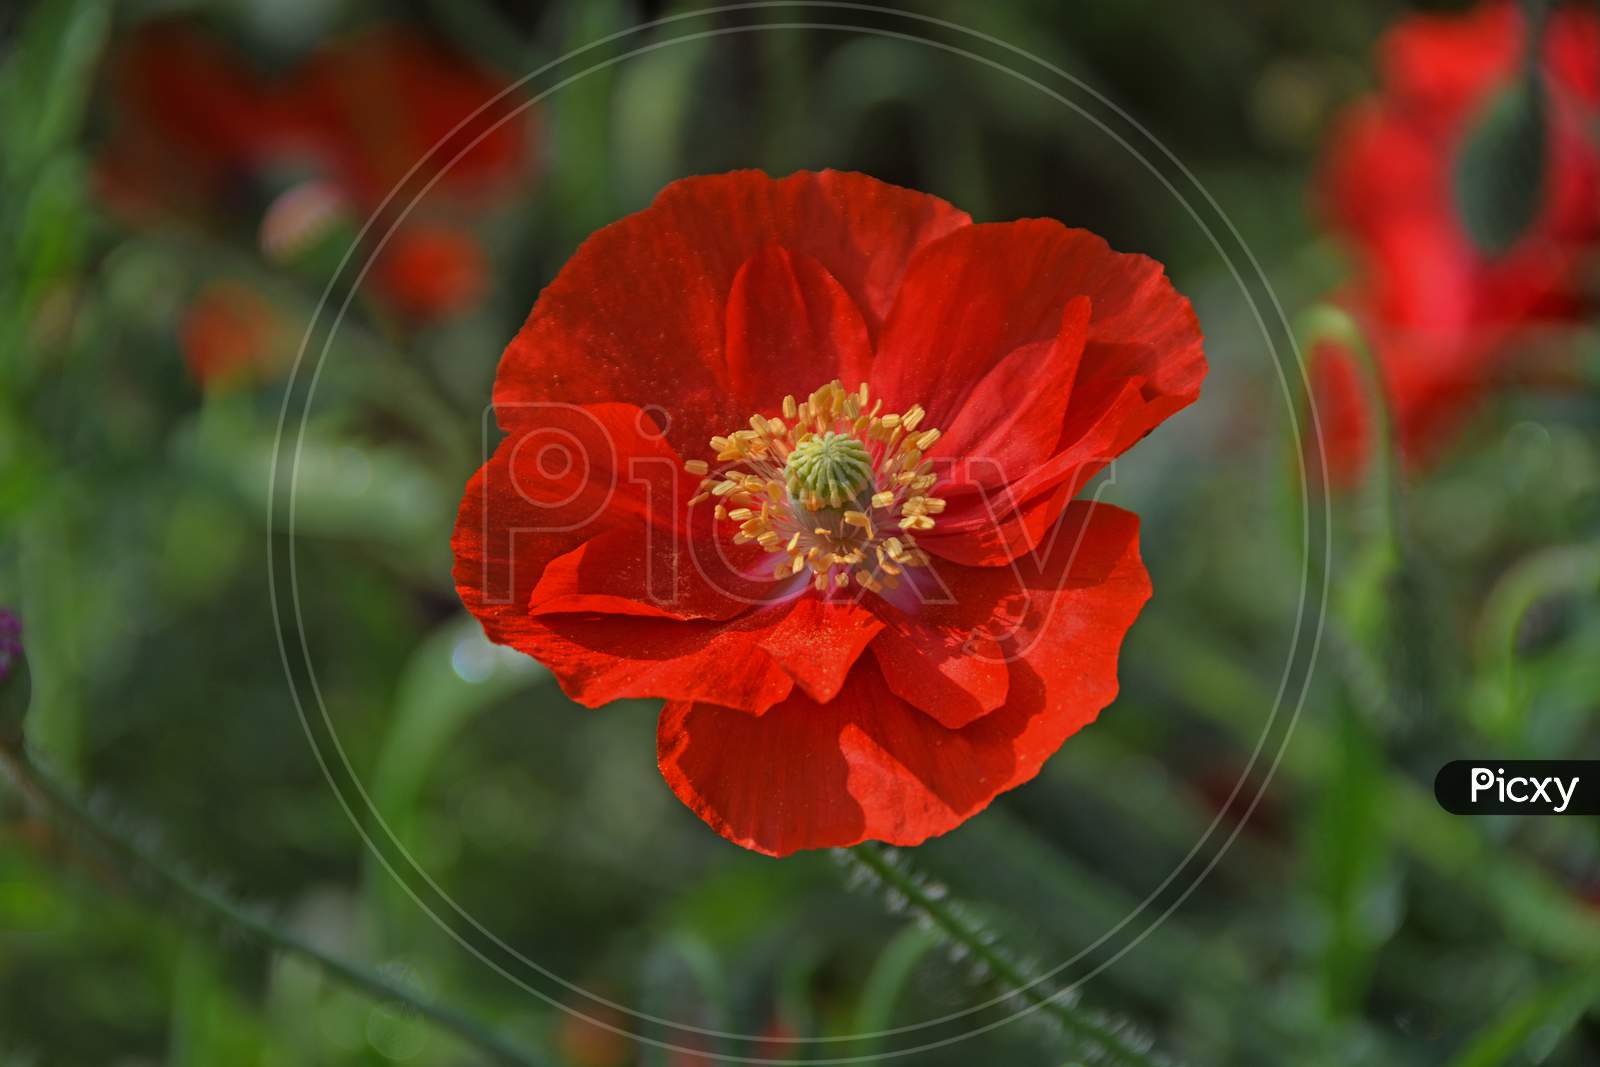 Red Corn Poppy With Blur Background In The Spring Season.